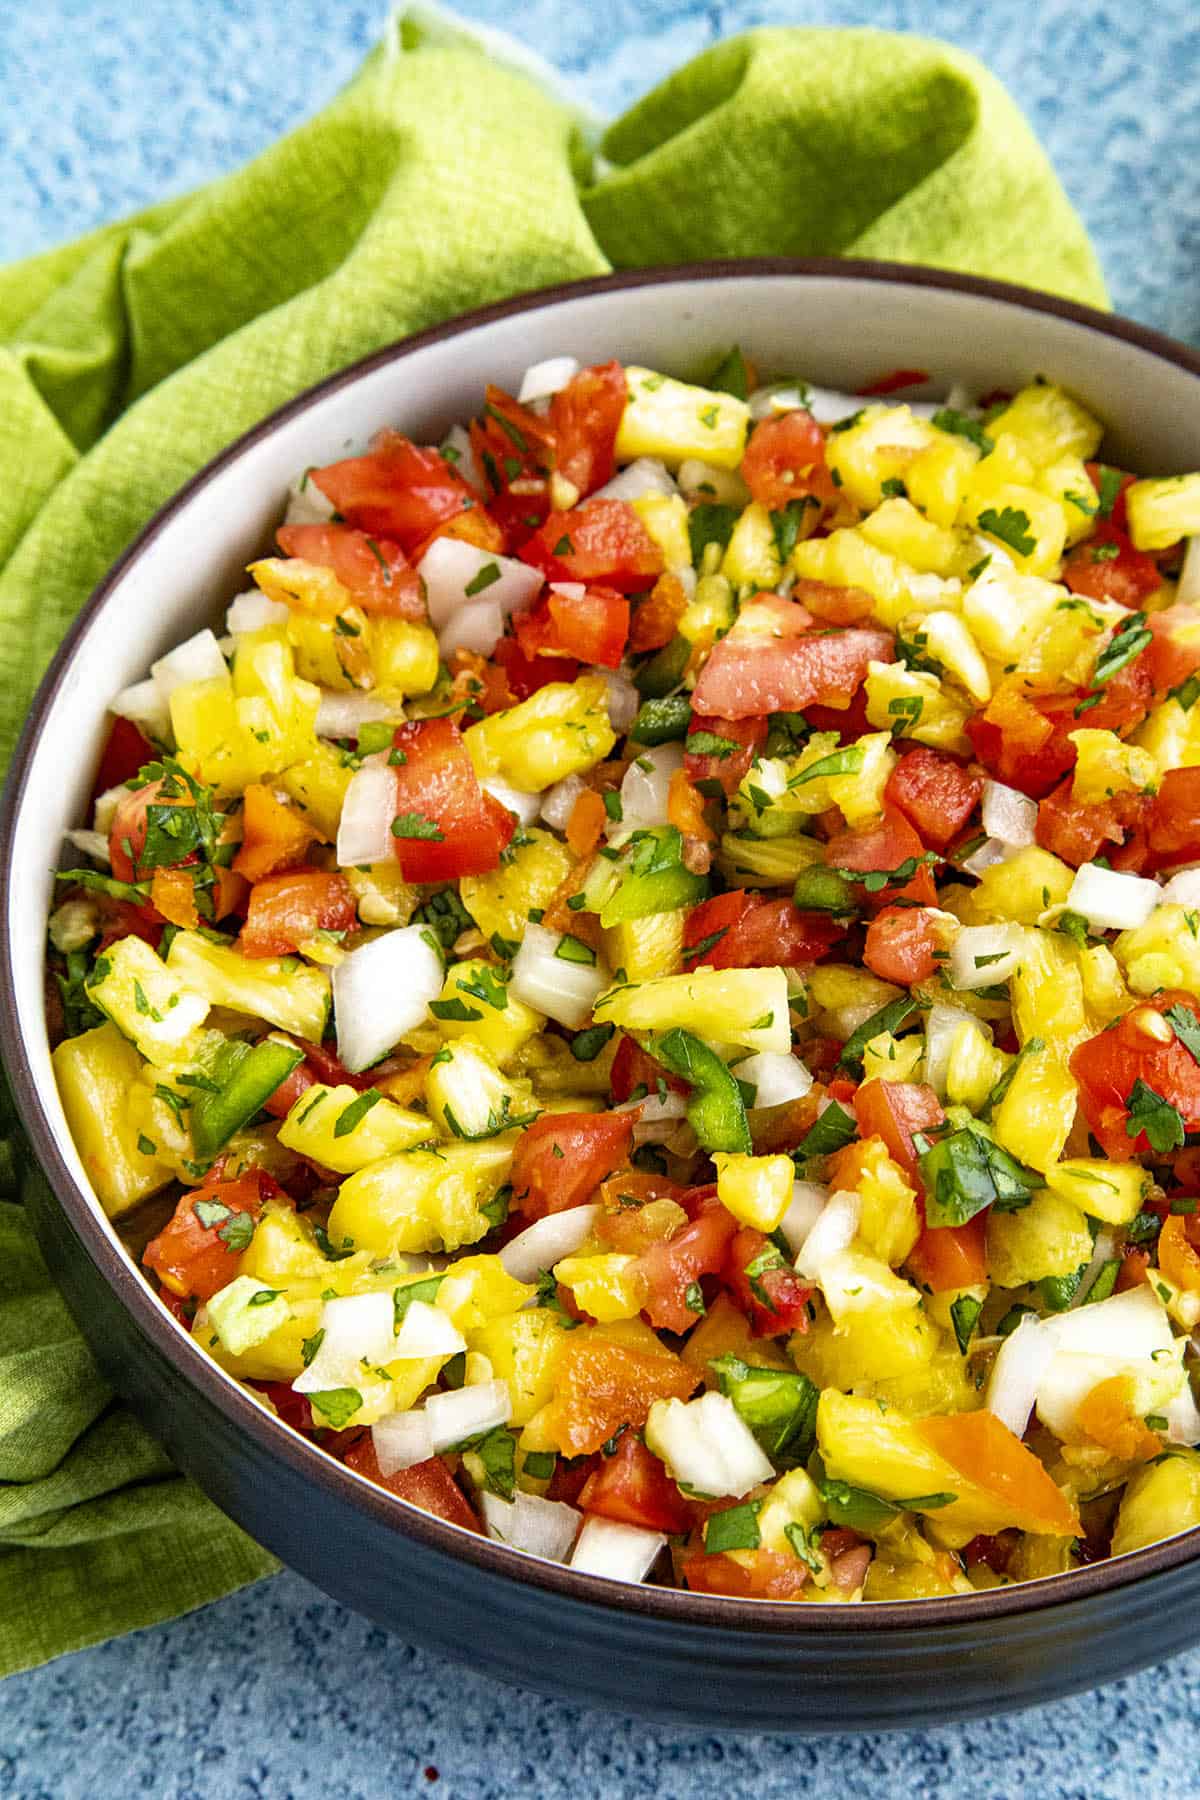 Spicy Pineapple Salsa with habanero, tomato and juicy pineapple